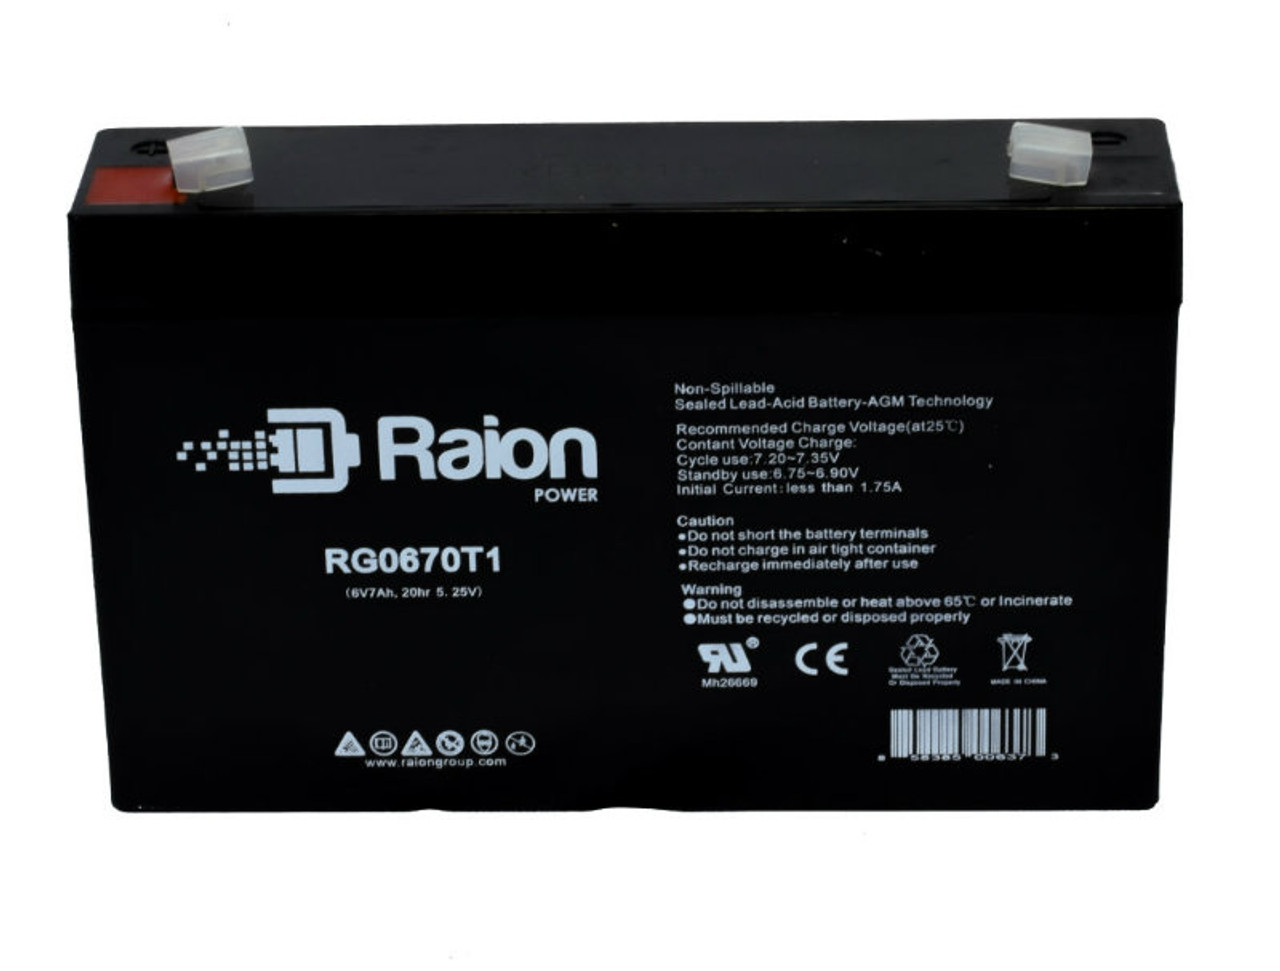 Raion Power RG0670T1 Replacement Battery Cartridge for Ivy Biomedical Systems 700 Monitor